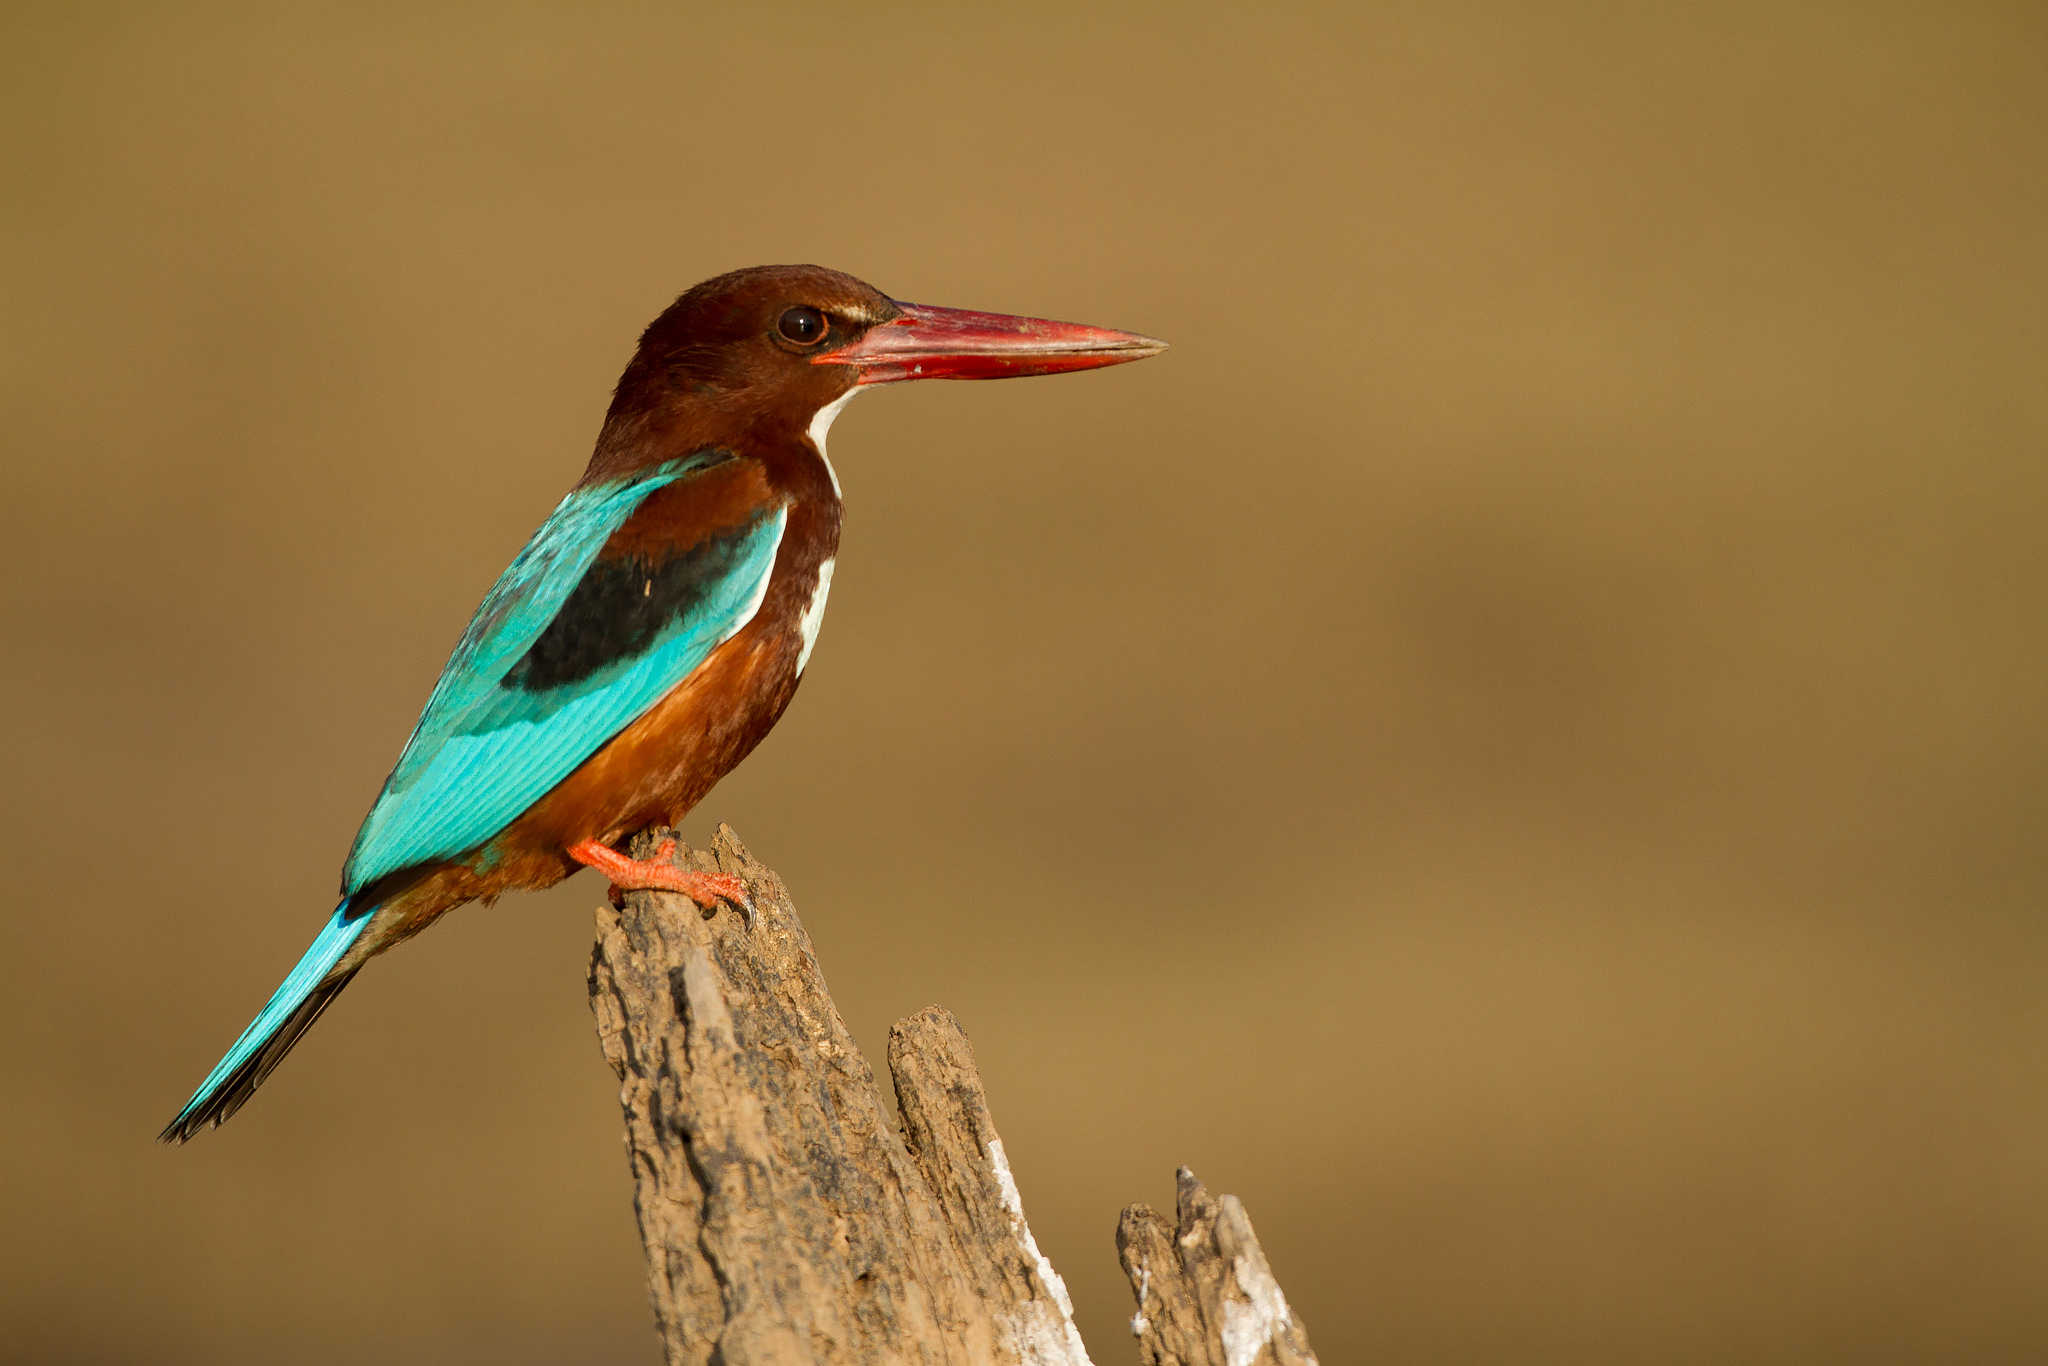 White-Throated Kingfisher sitting on a perch in Bannerghatta near Bangalore by wildlife photographer Phillip Ross